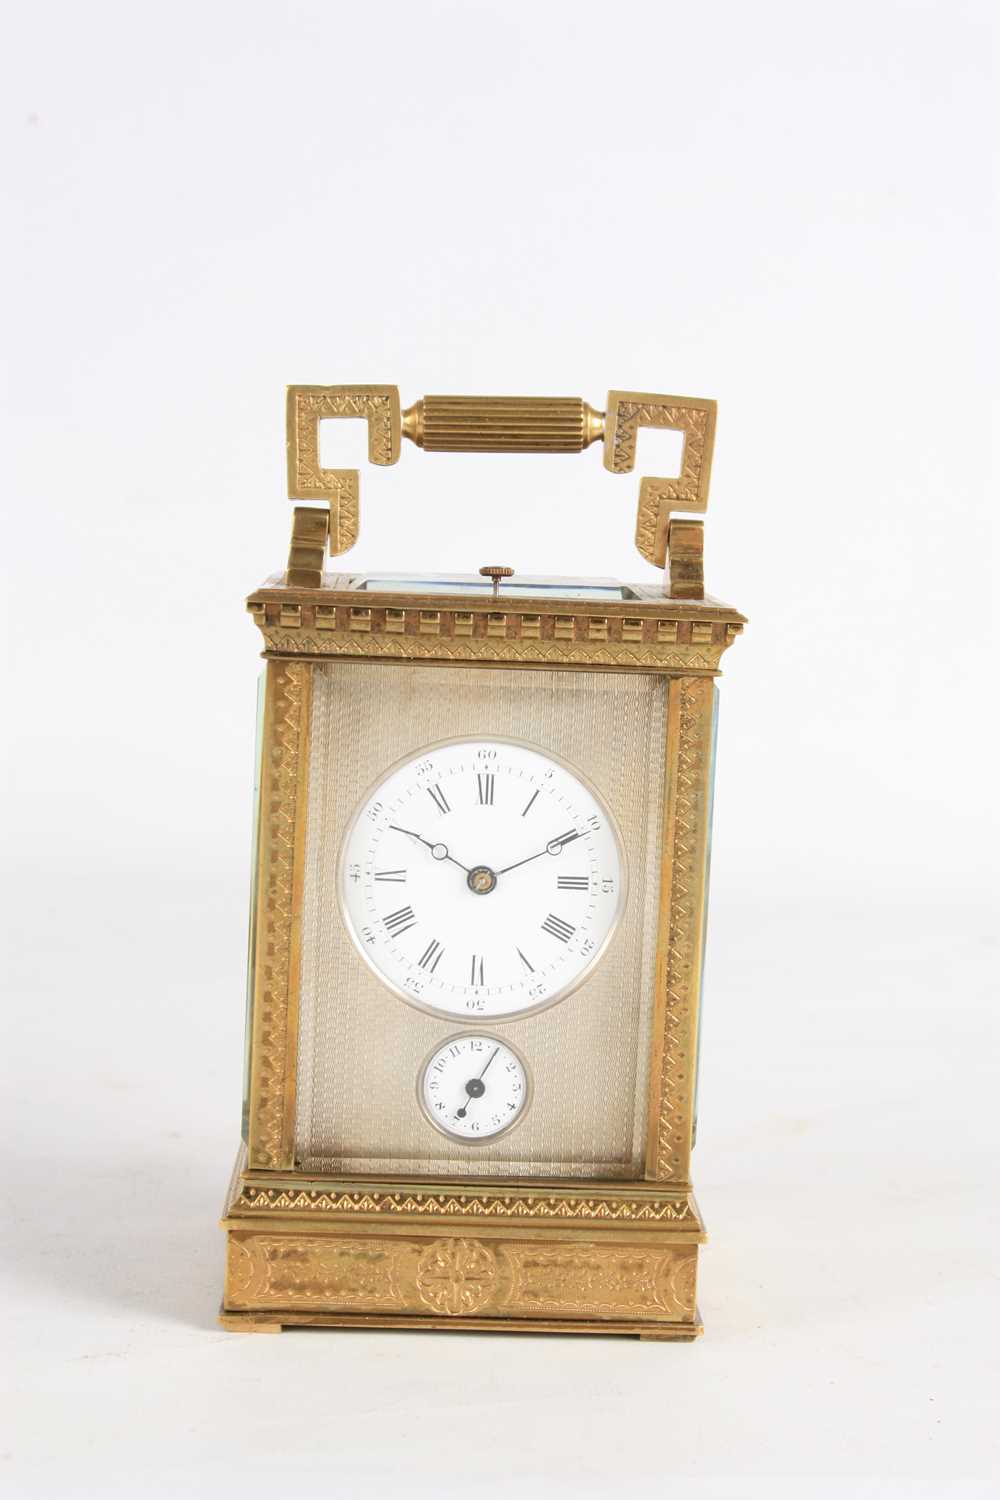 A LATE 19TH CENTURY FRENCH ENGRAVED BRASS REPEATING CARRAIGE CLOCK WITH ALARM - Image 3 of 10